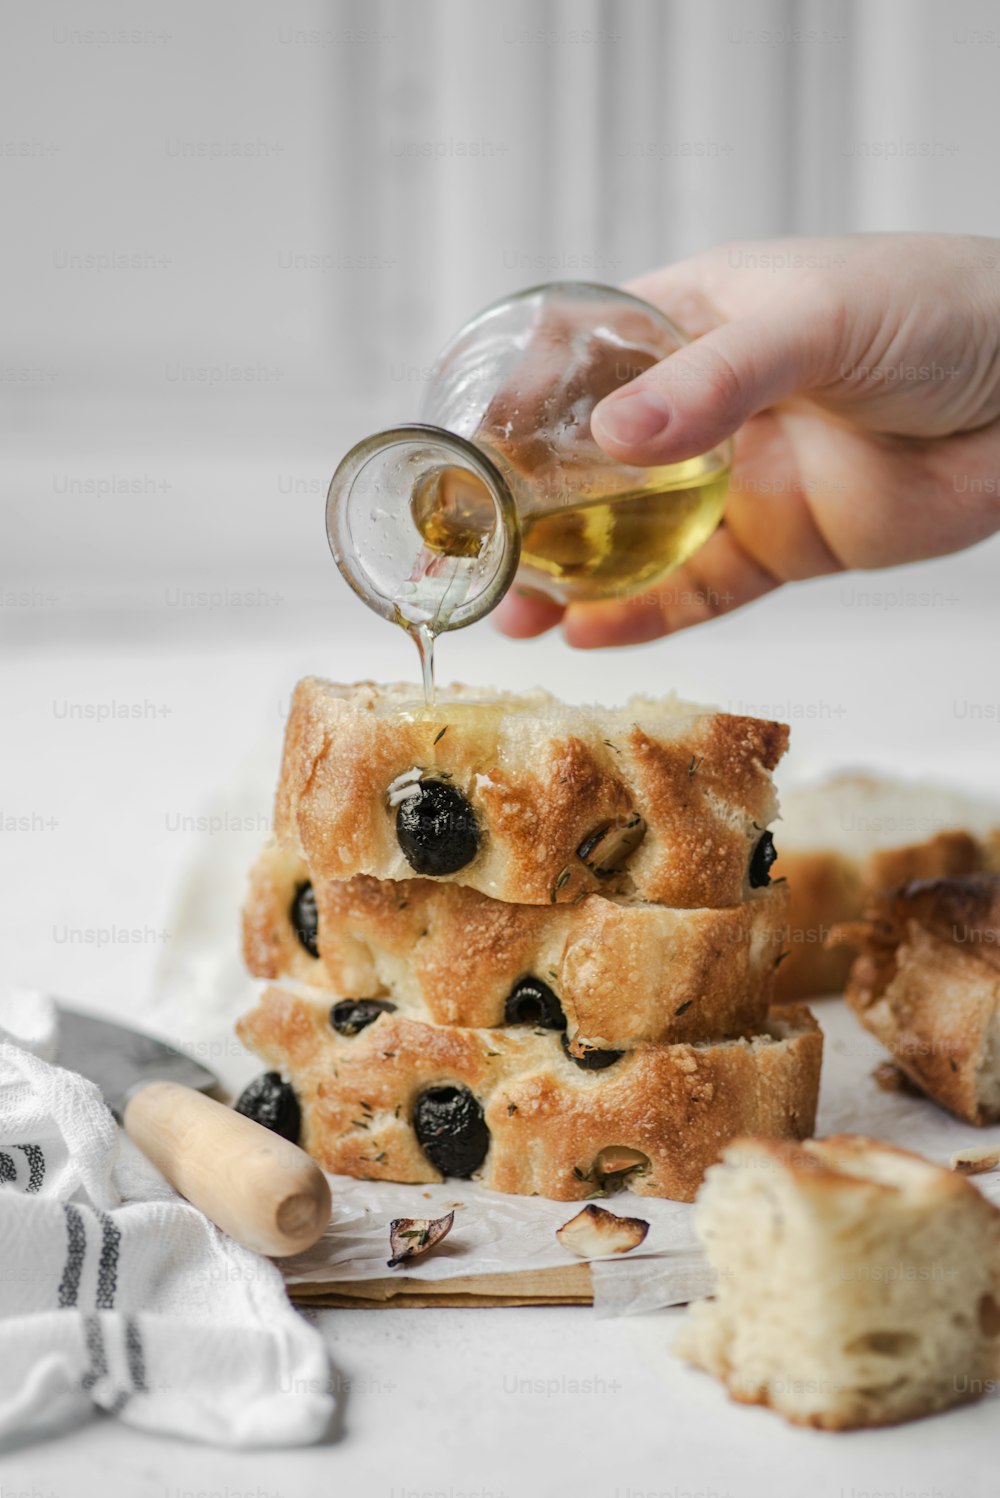 a person pouring olives into a loaf of bread